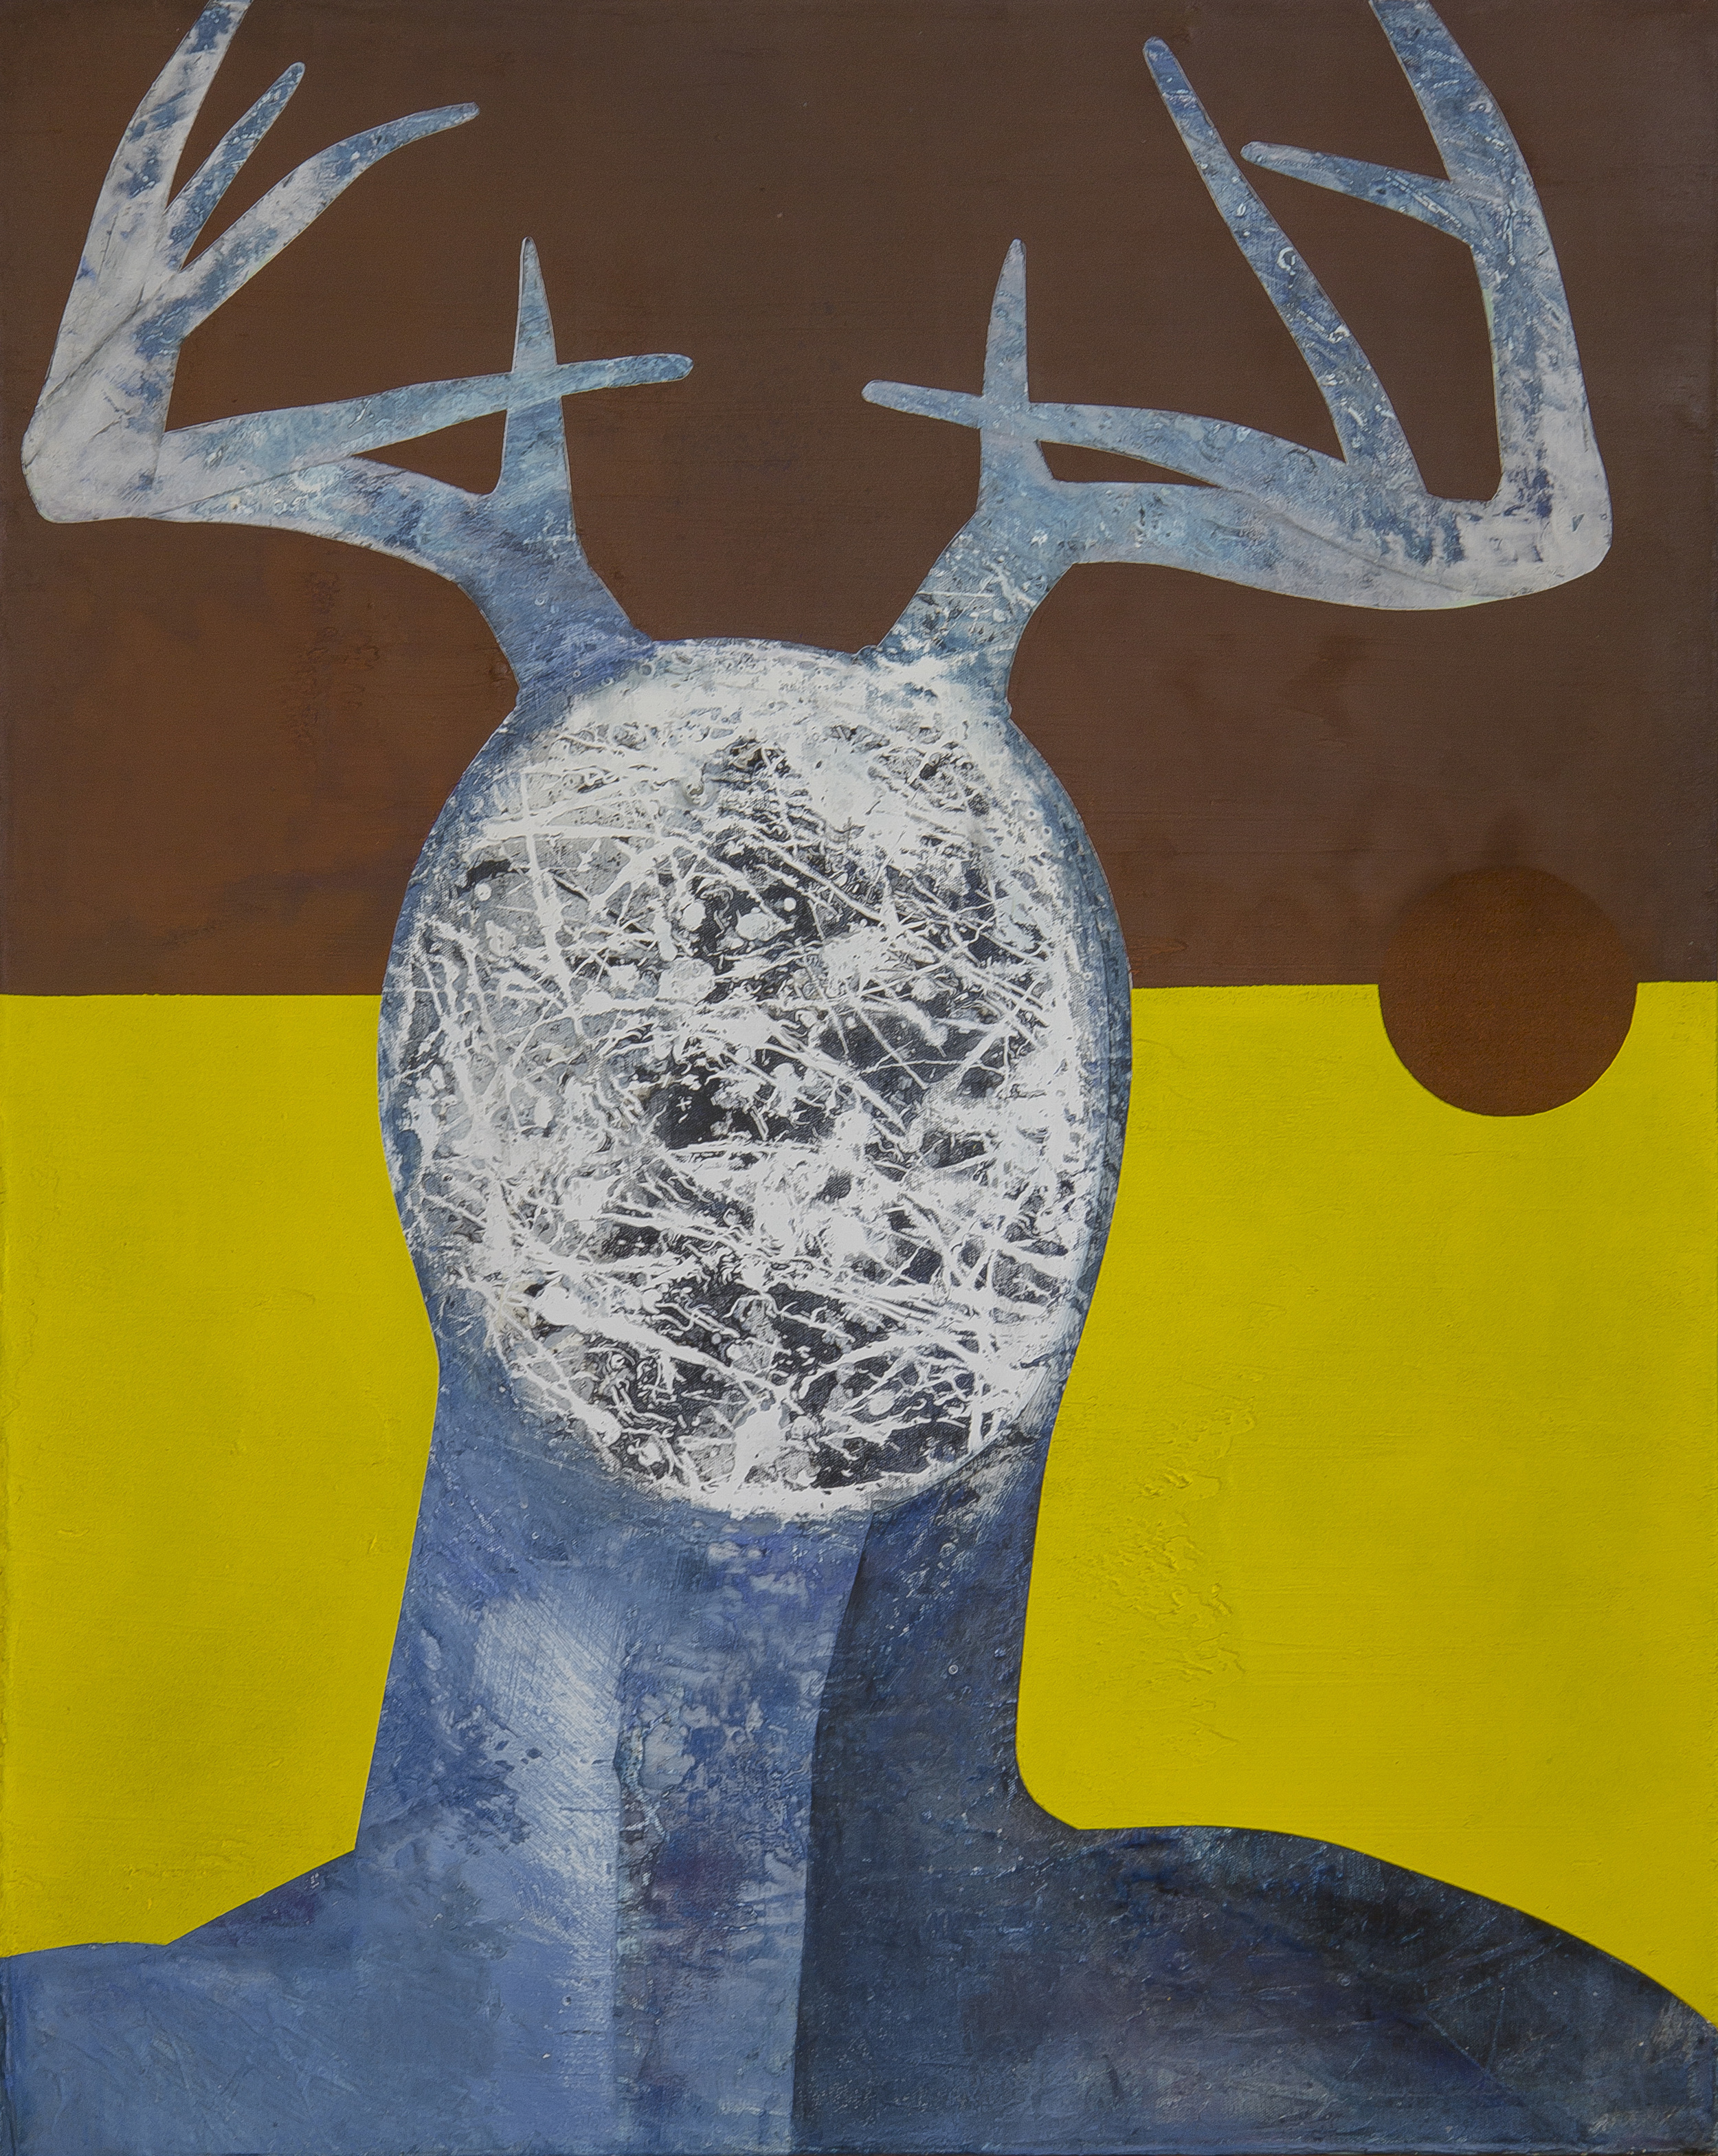  Buck acrylic on canvas  40 x 32 inches 2012  unavailable 